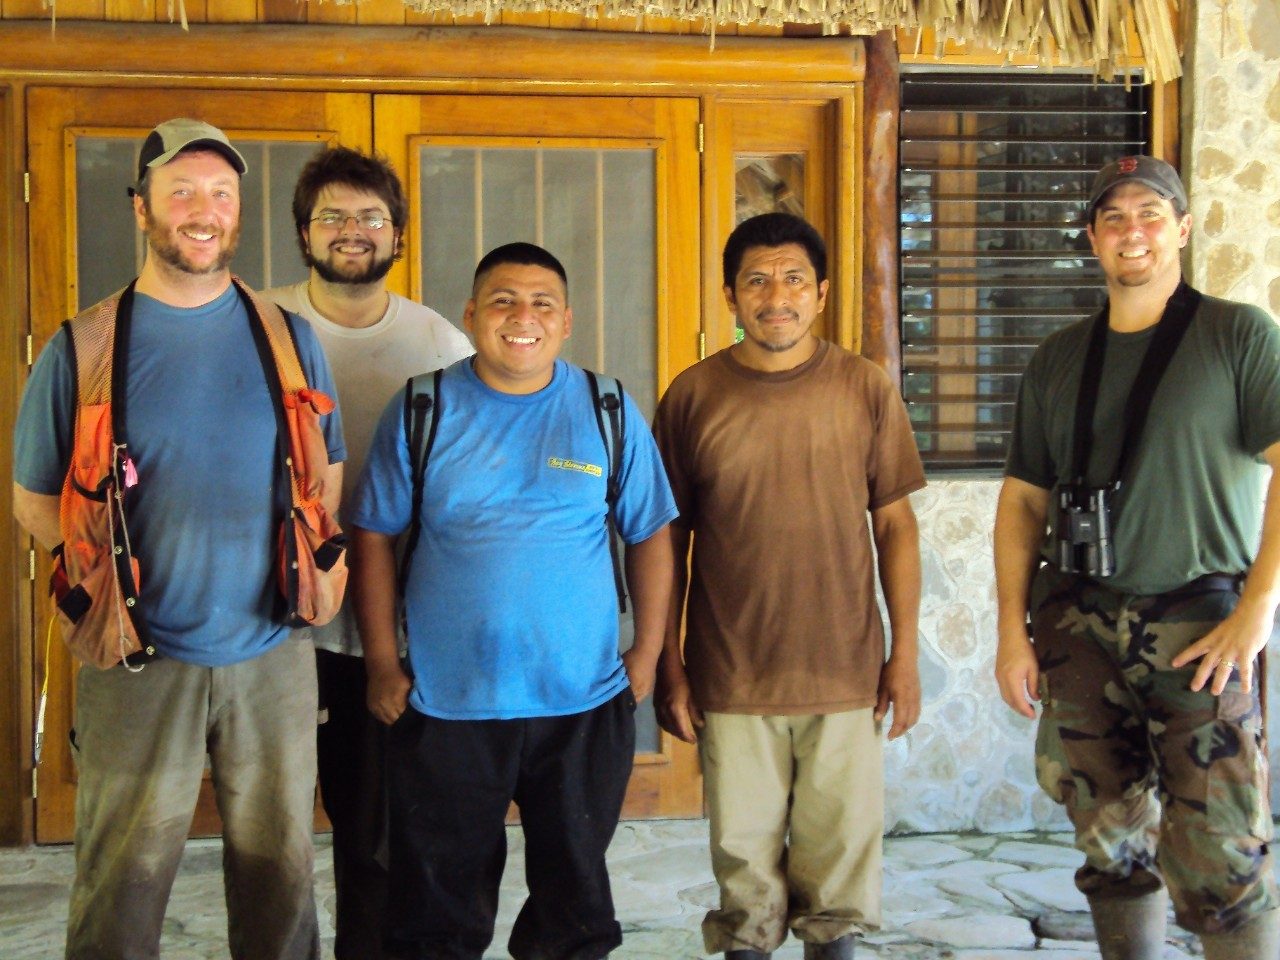 CMI field researchers with guides from Belize.